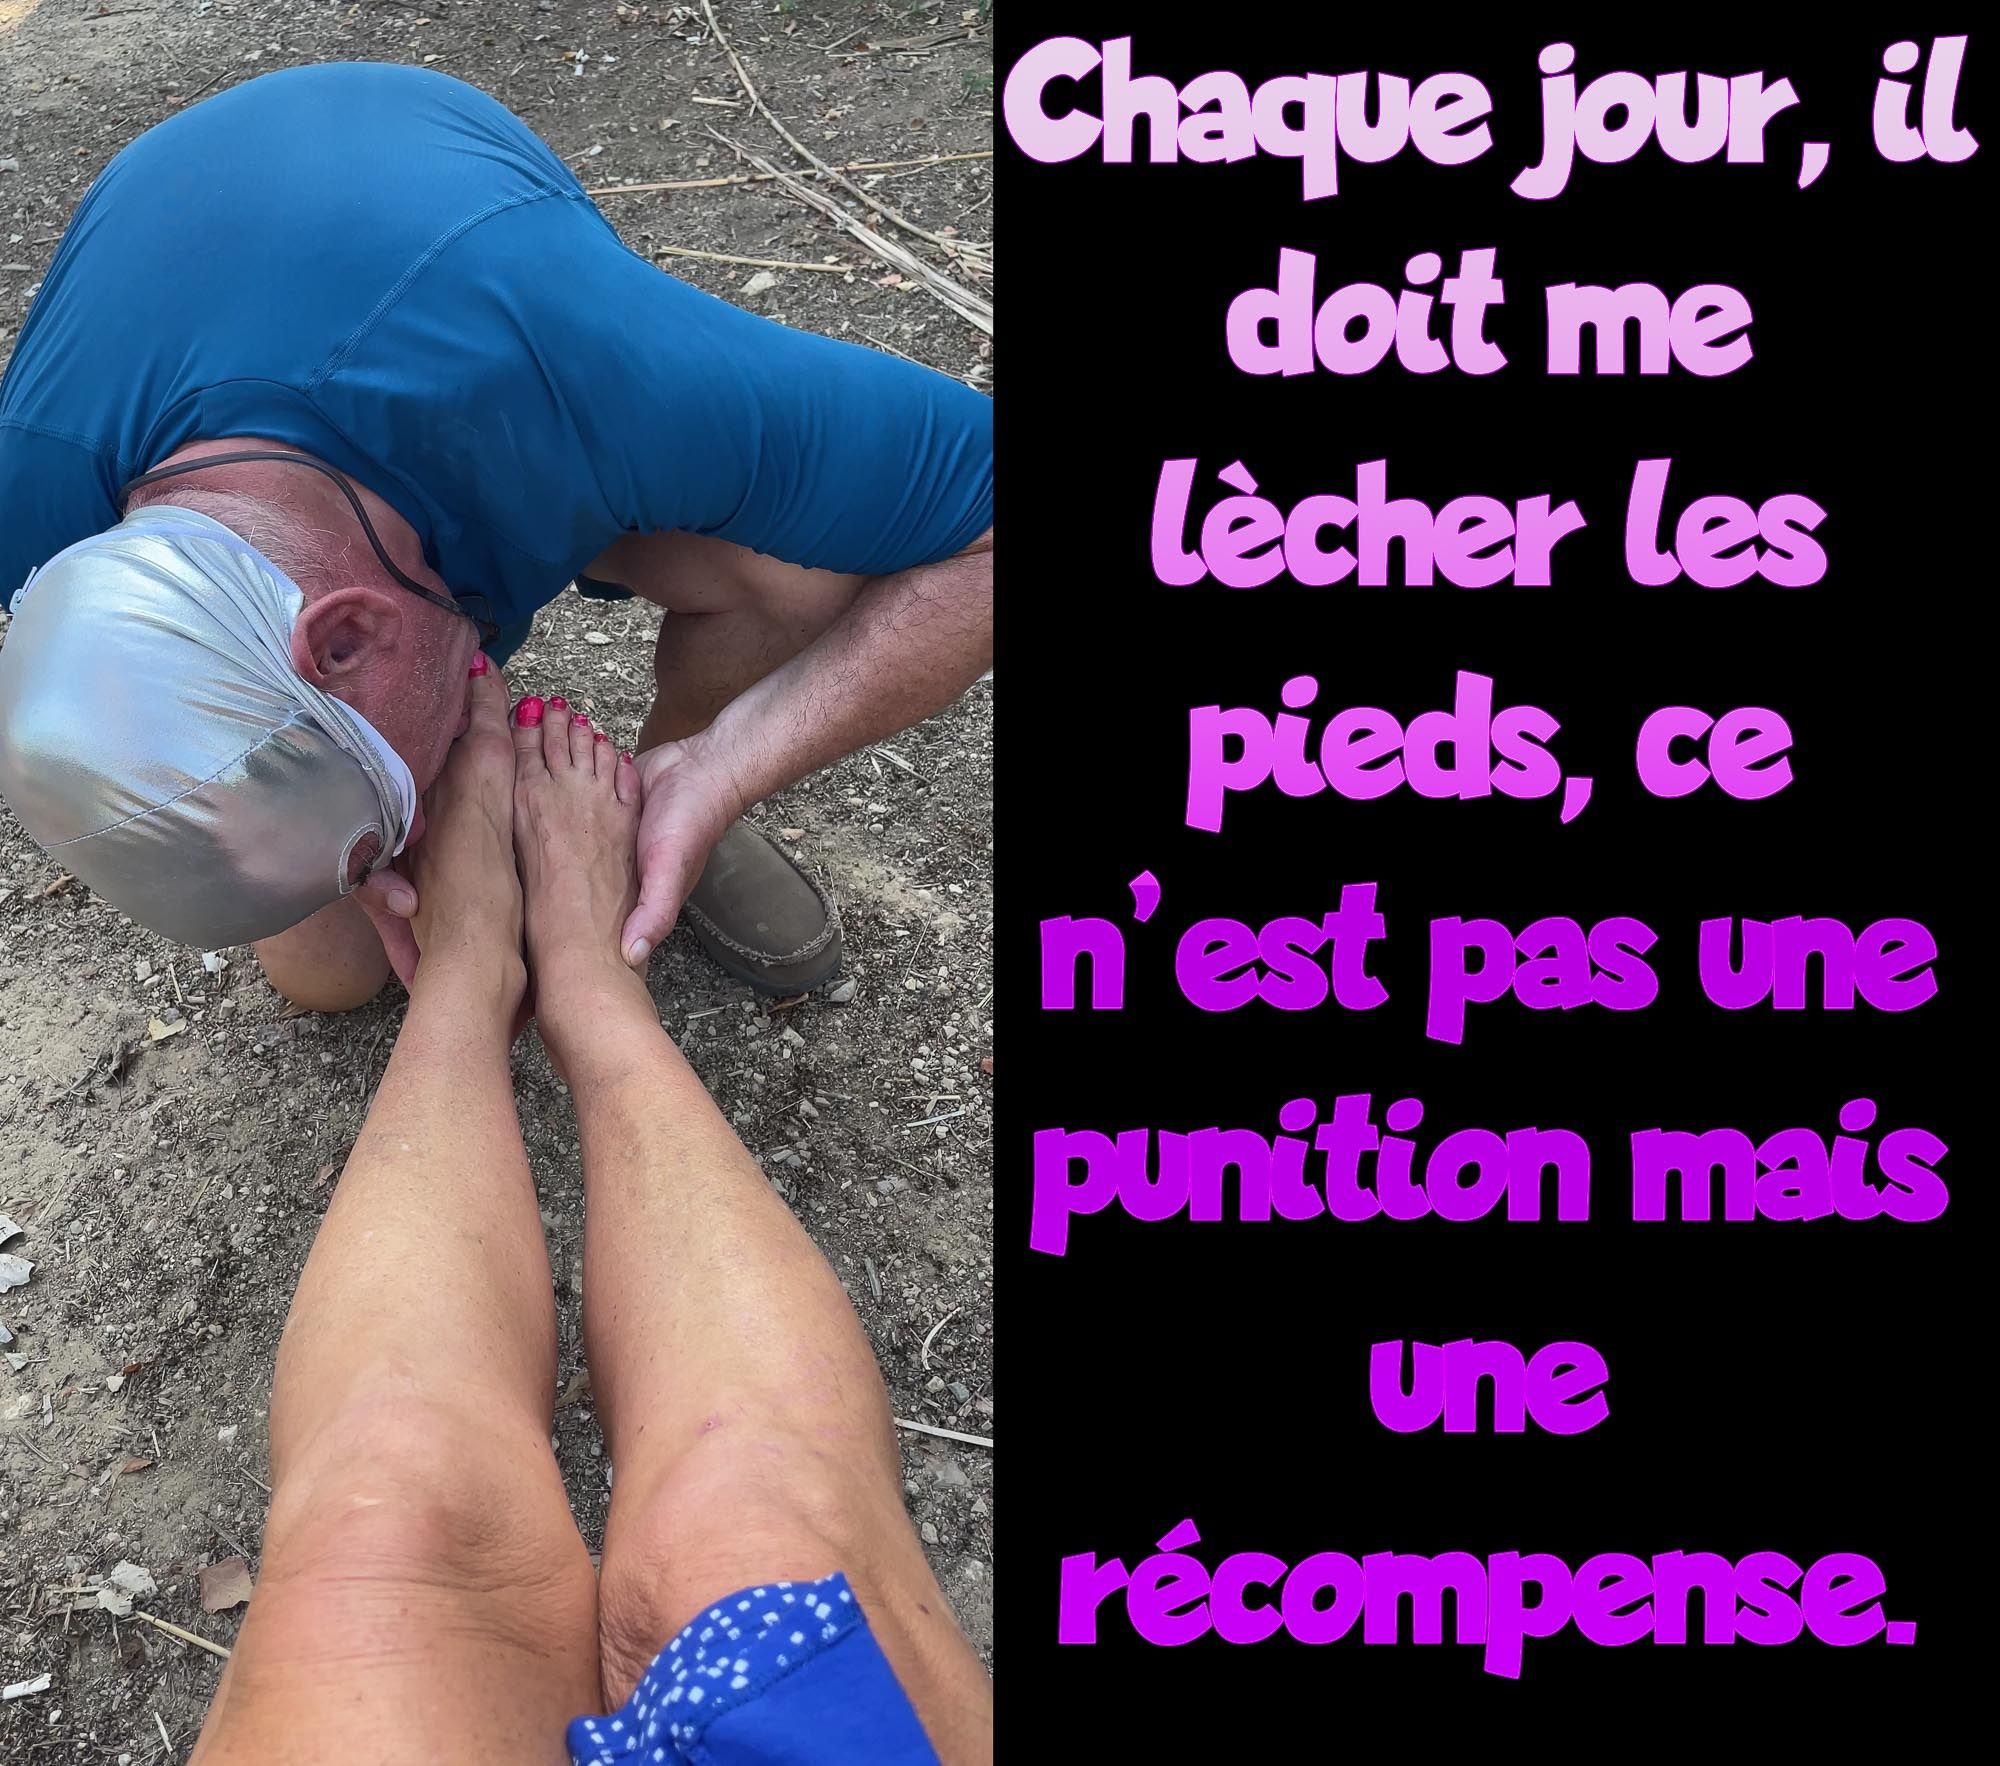 pictures about chastity  de 250-350 #51